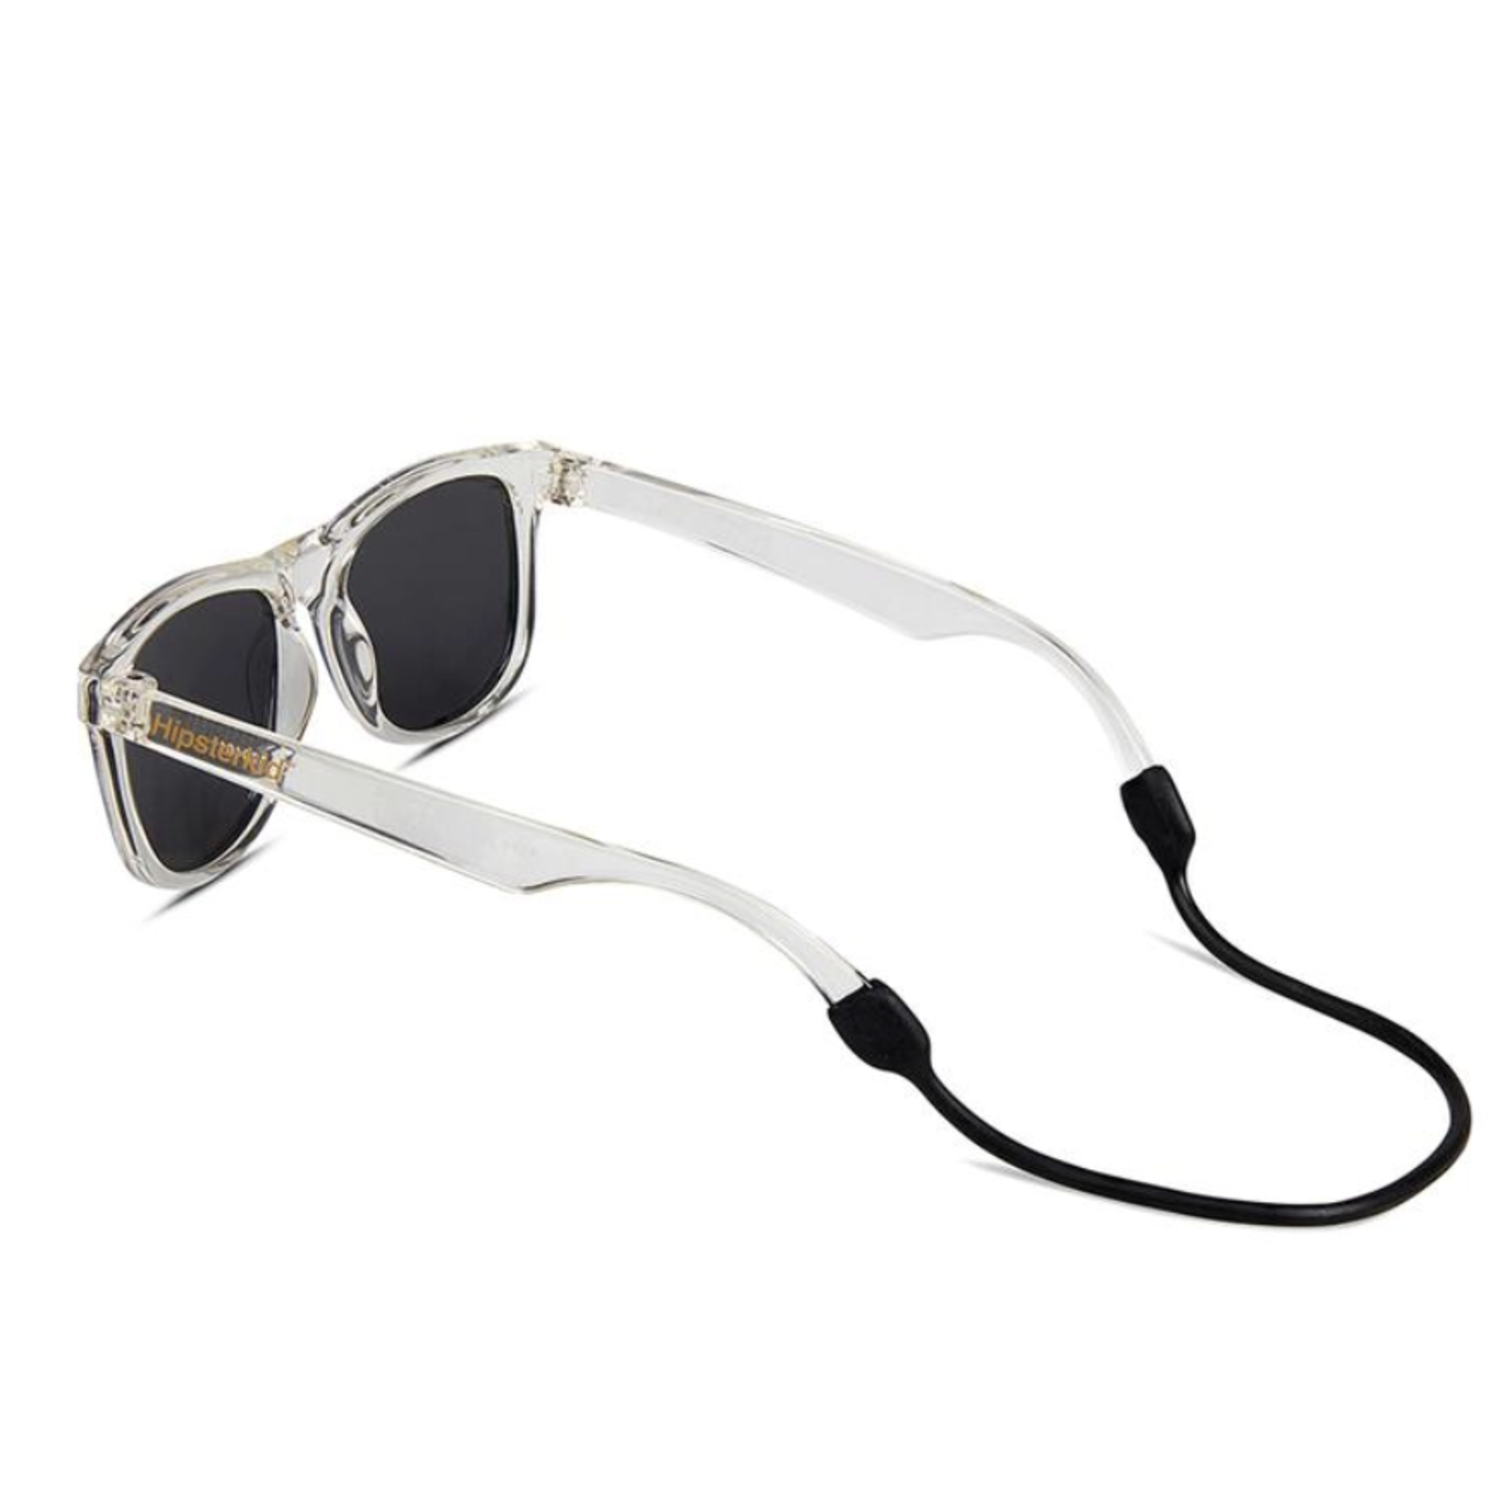 GOLDs Sunglasses - Clear 3-6 yrs. - Wang nyc